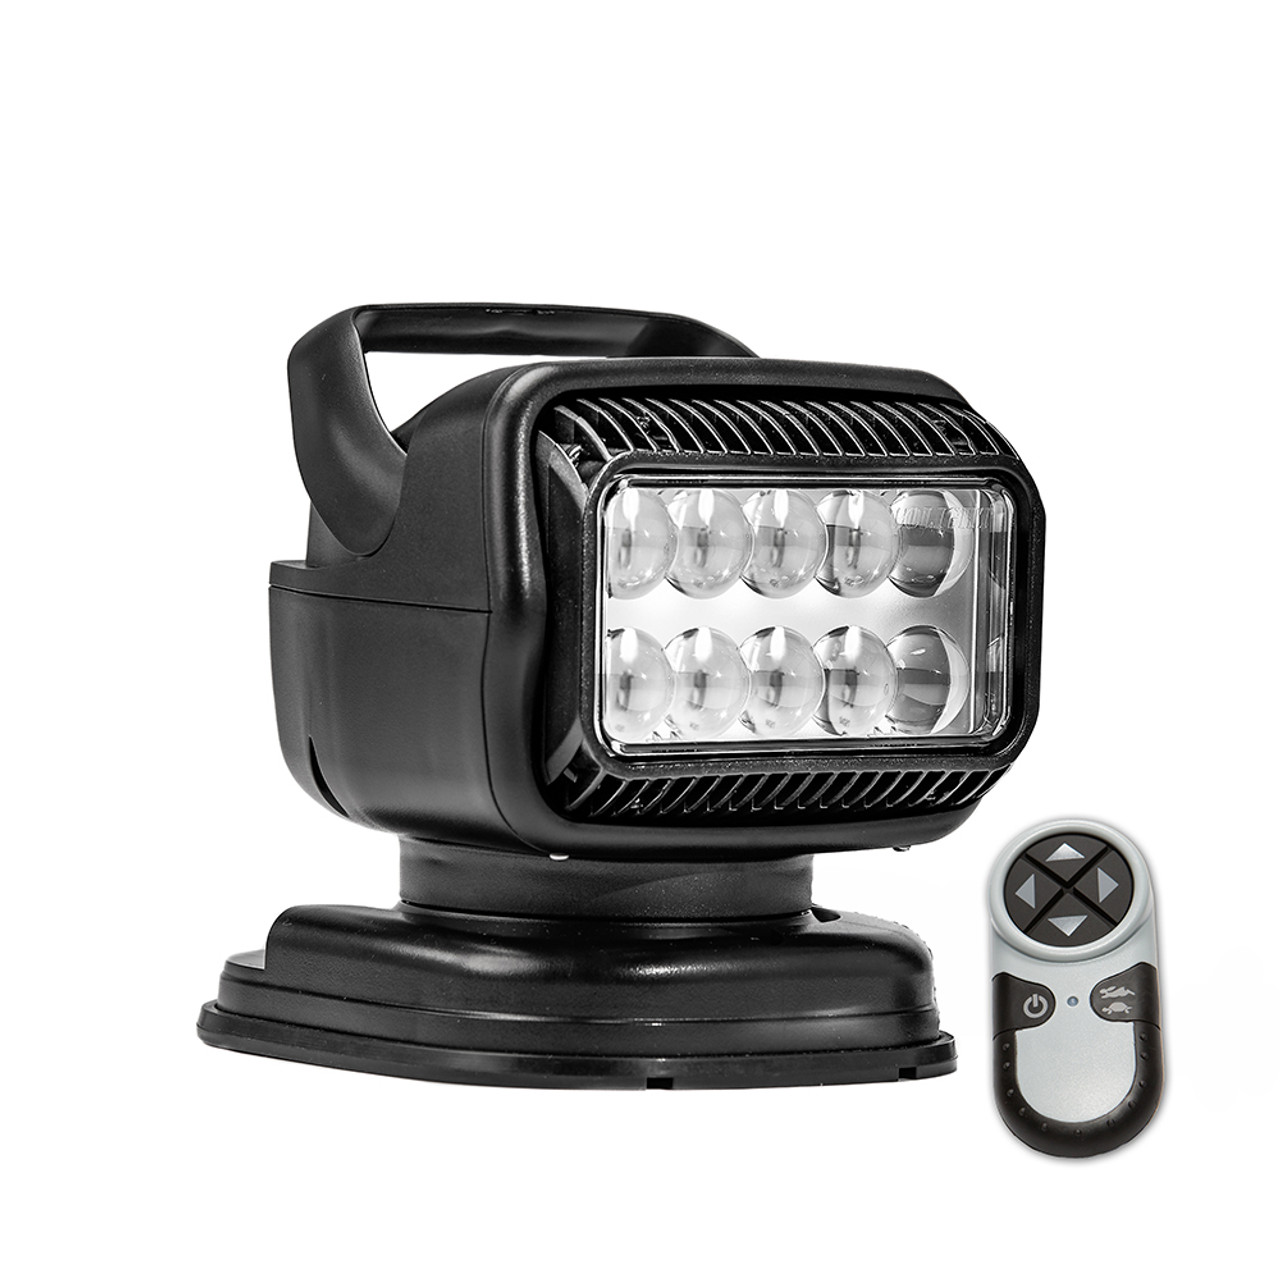 Golight 79014 Radioray Remote Control LED Searchlight, includes Magnetic Mount Shoe, Programmable Wireless Remote, and 15 ft. Cord with Cigarette Plug for 12v DC, available in White or Black